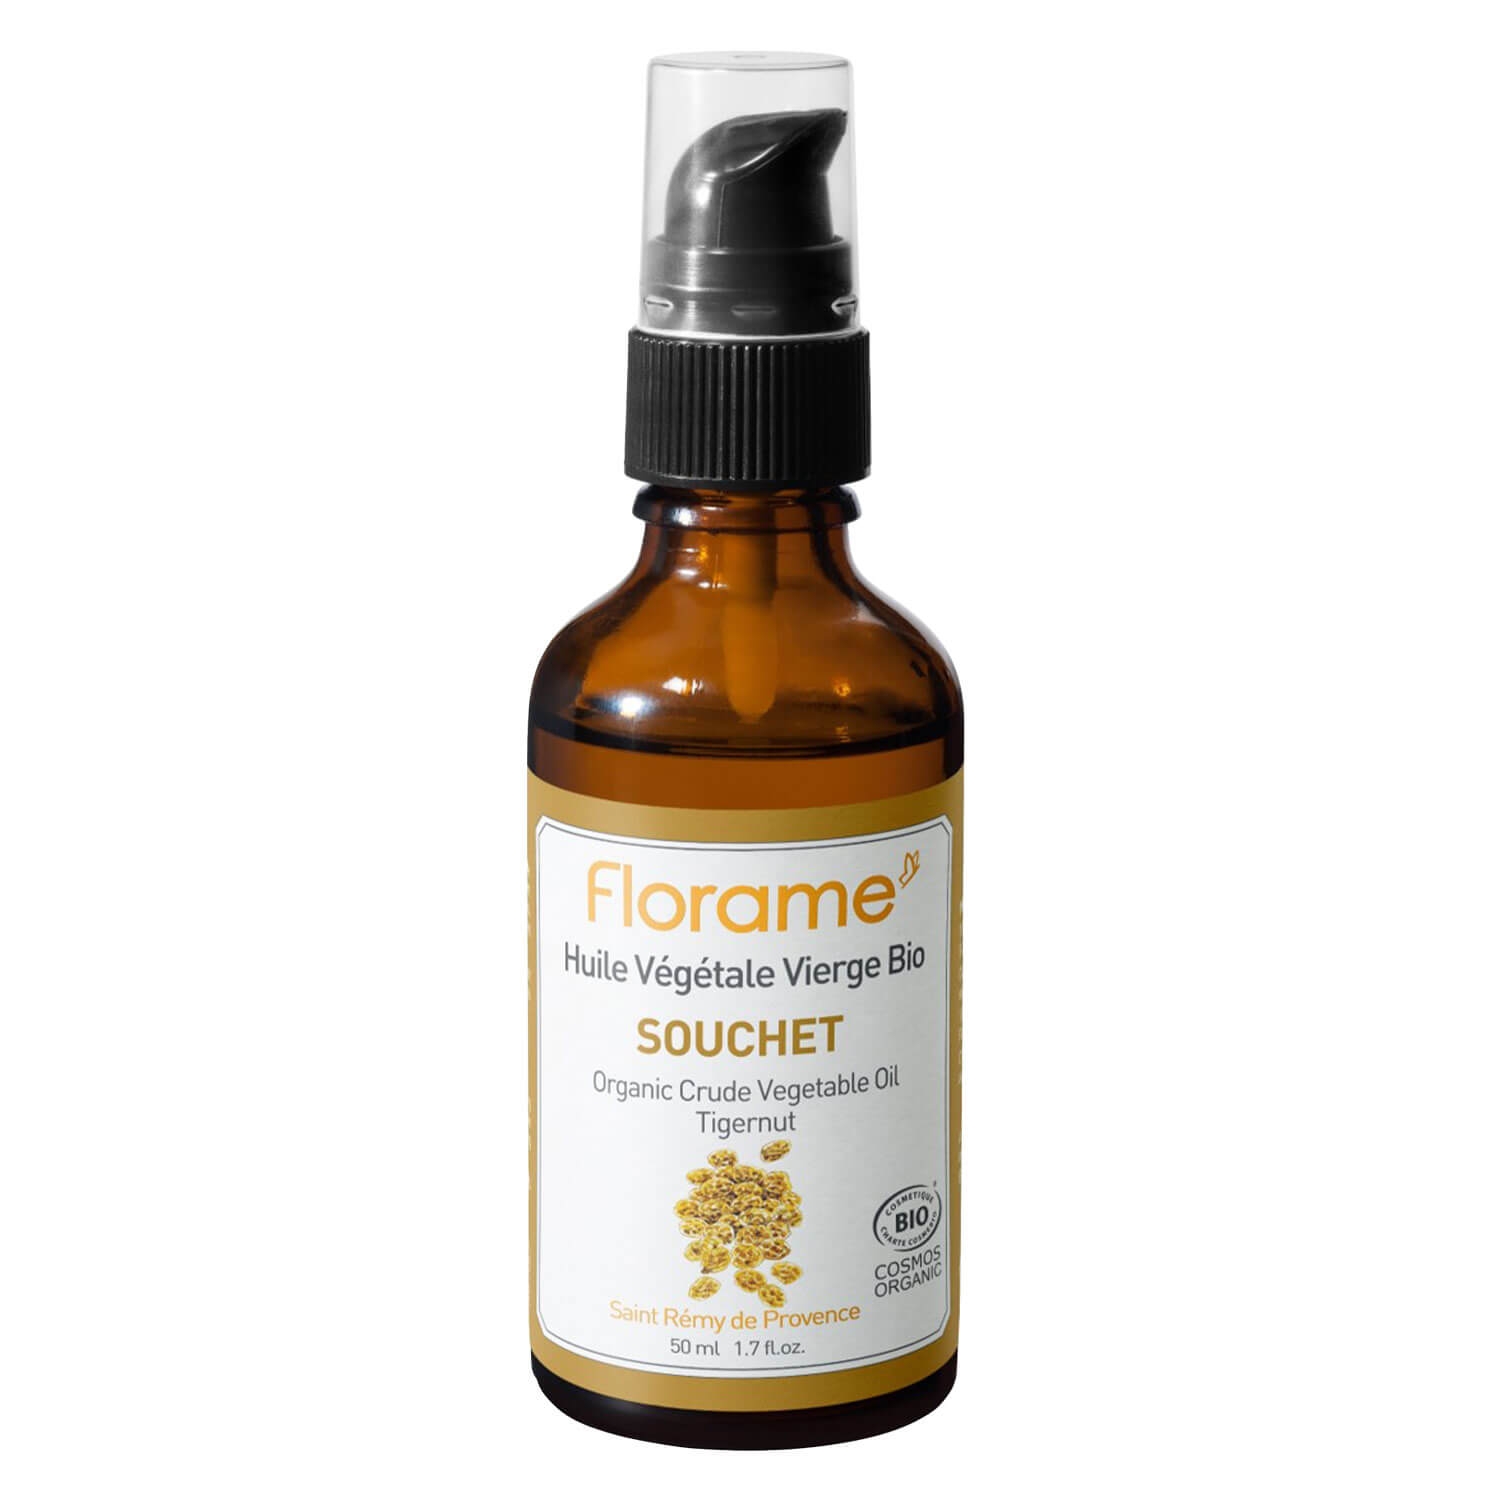 Product image from Florame - Organic Crude Tigernut Vegetable Oil